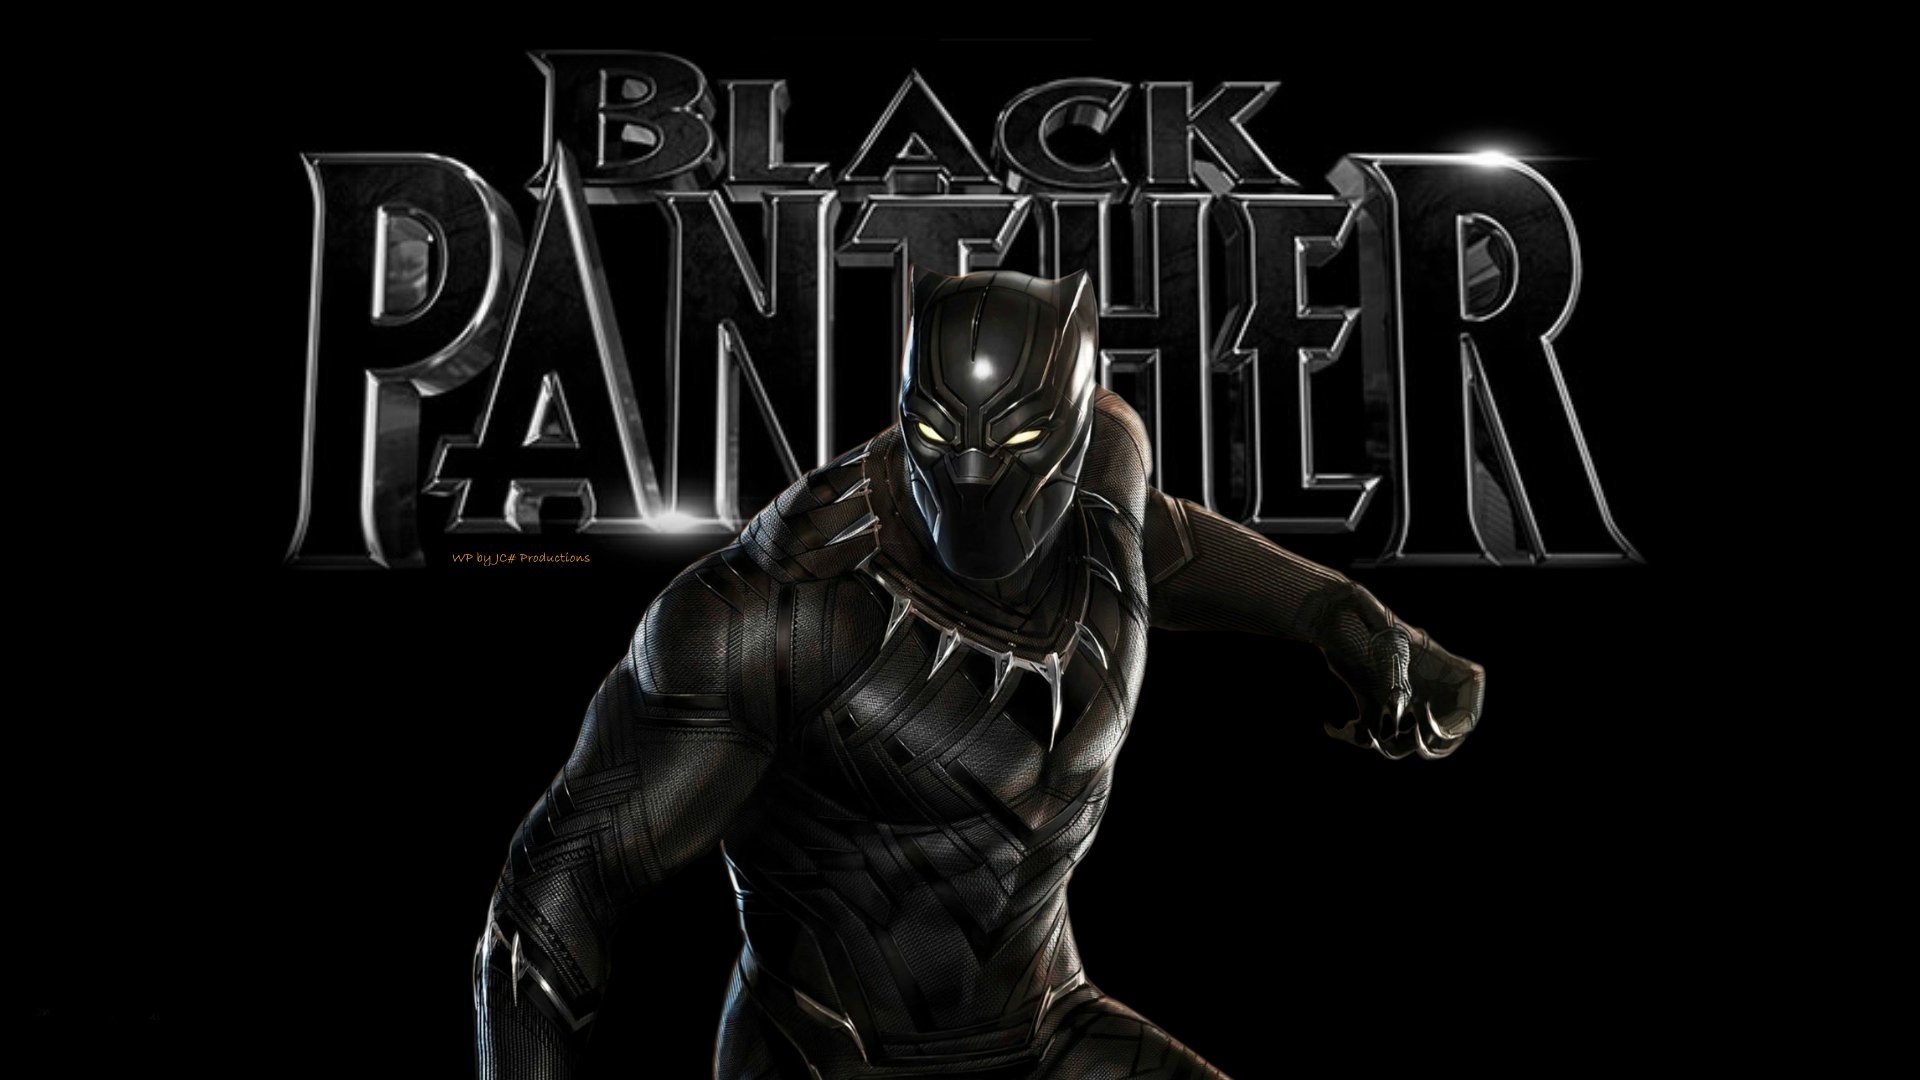 1920x1080 Black Panther Comic Book images Black Panther 6d HD wallpaper and  background photos